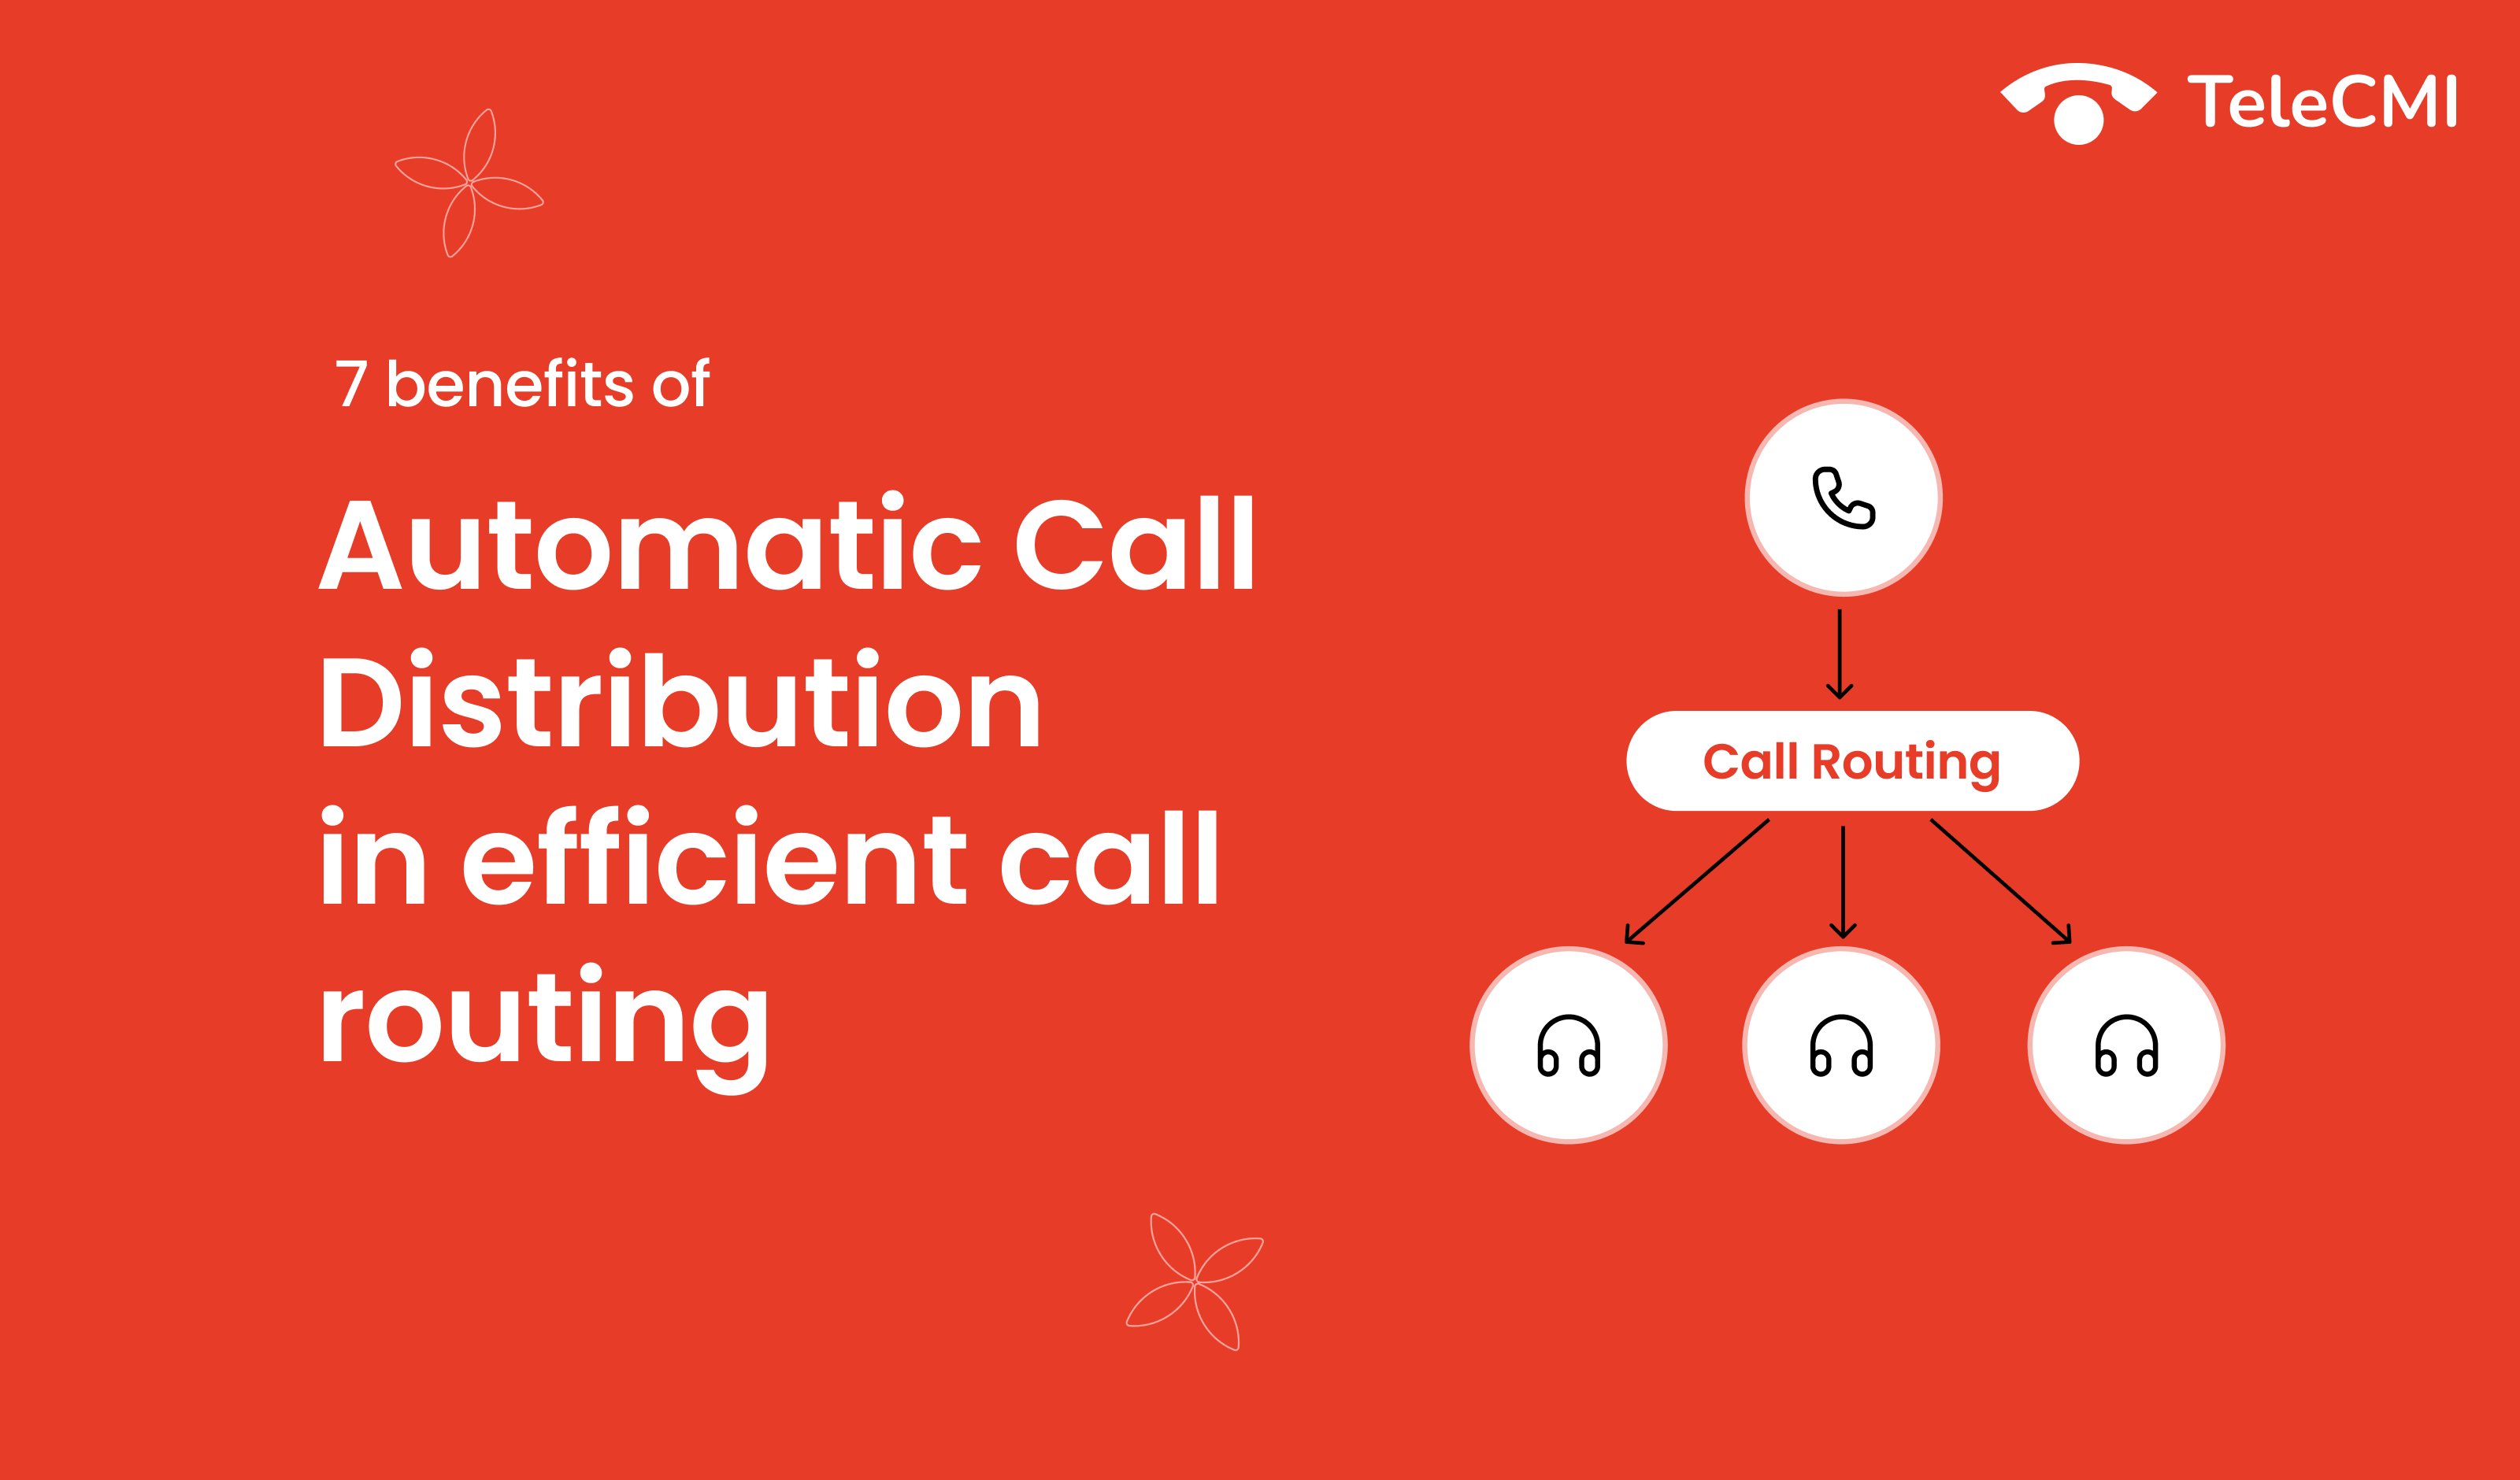 7 Proven Benefits of Automatic Call Distribution in
                            Efficient Call Routing